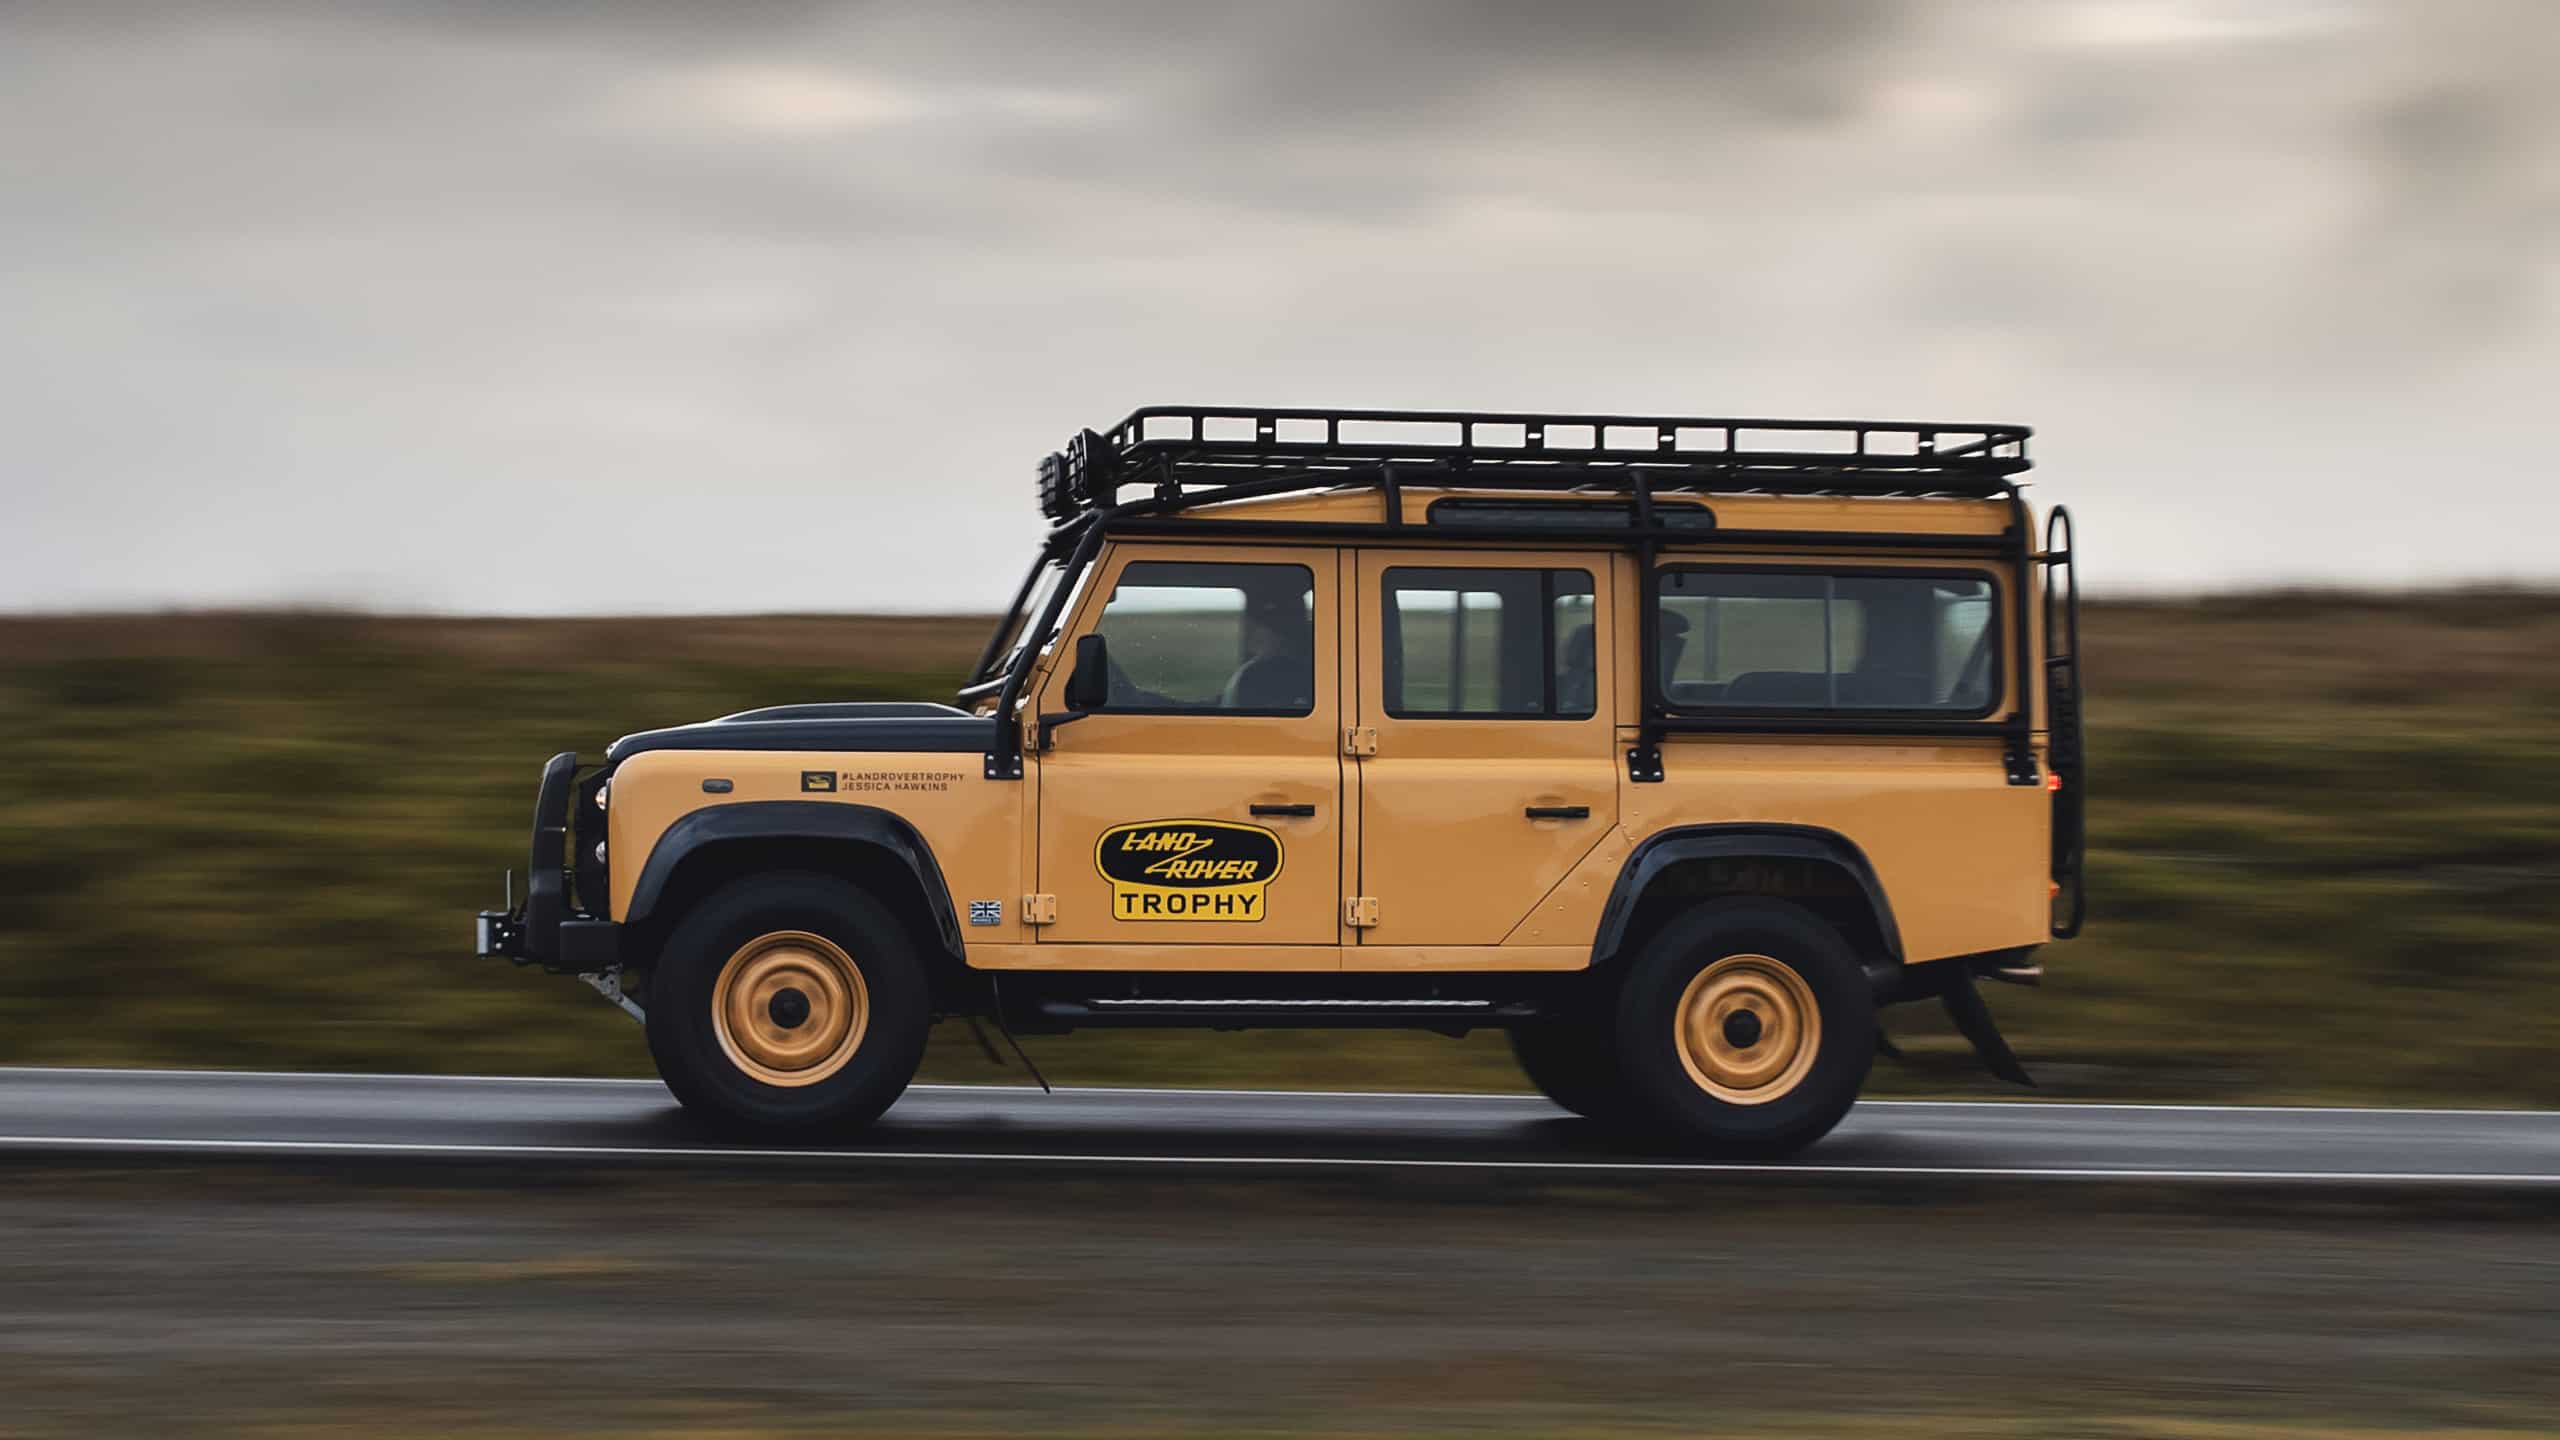 Landrover Defender classic Trophy running on road